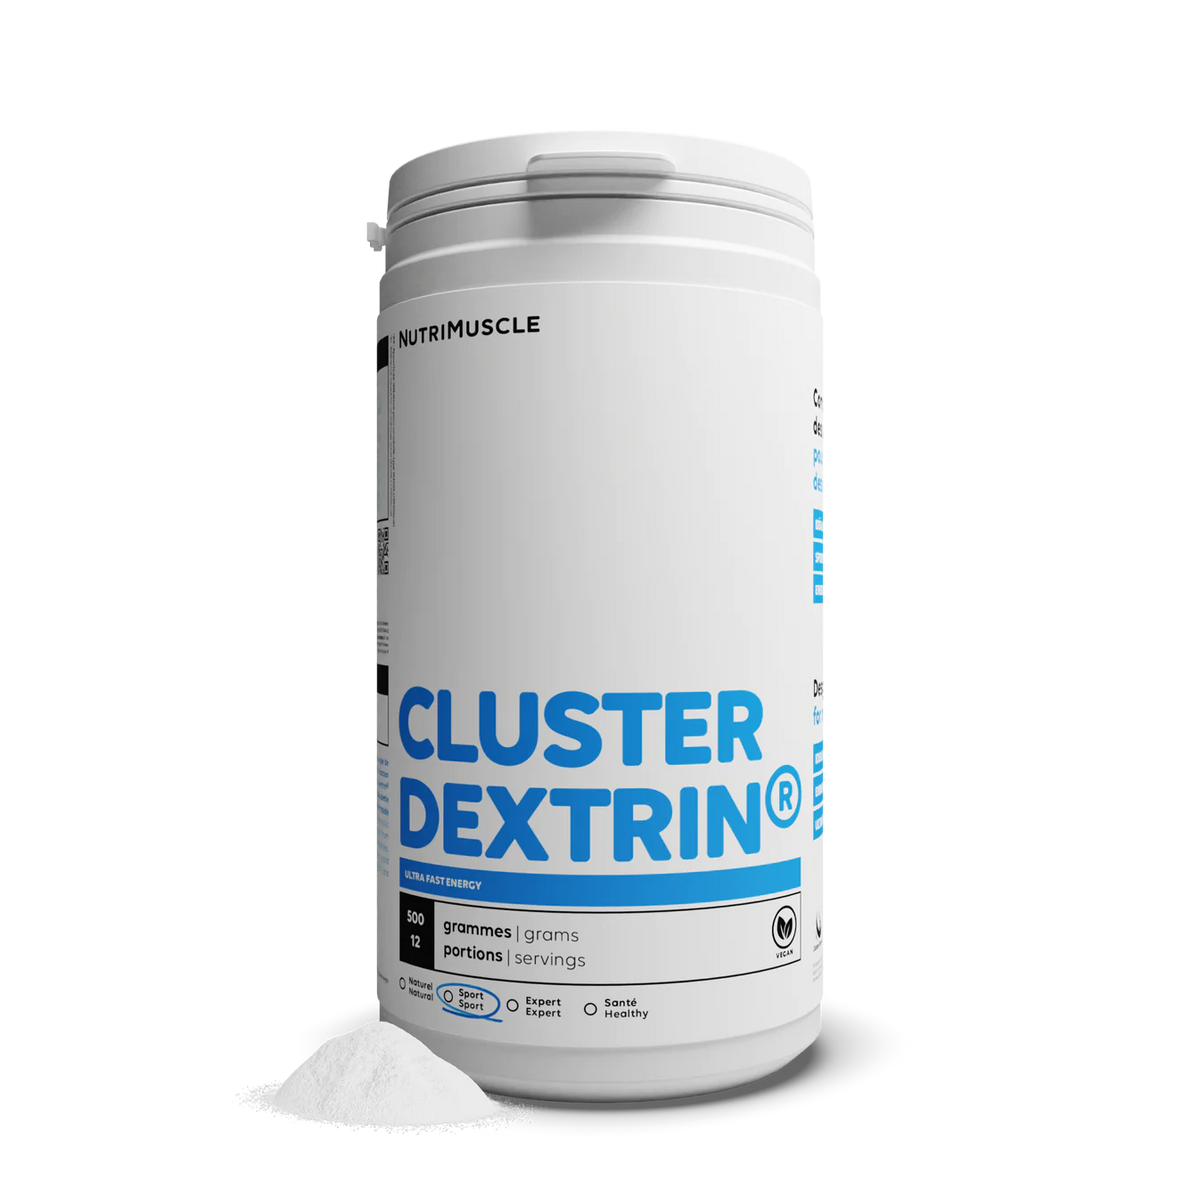 Nutrimuscle - Cluster Dextrin